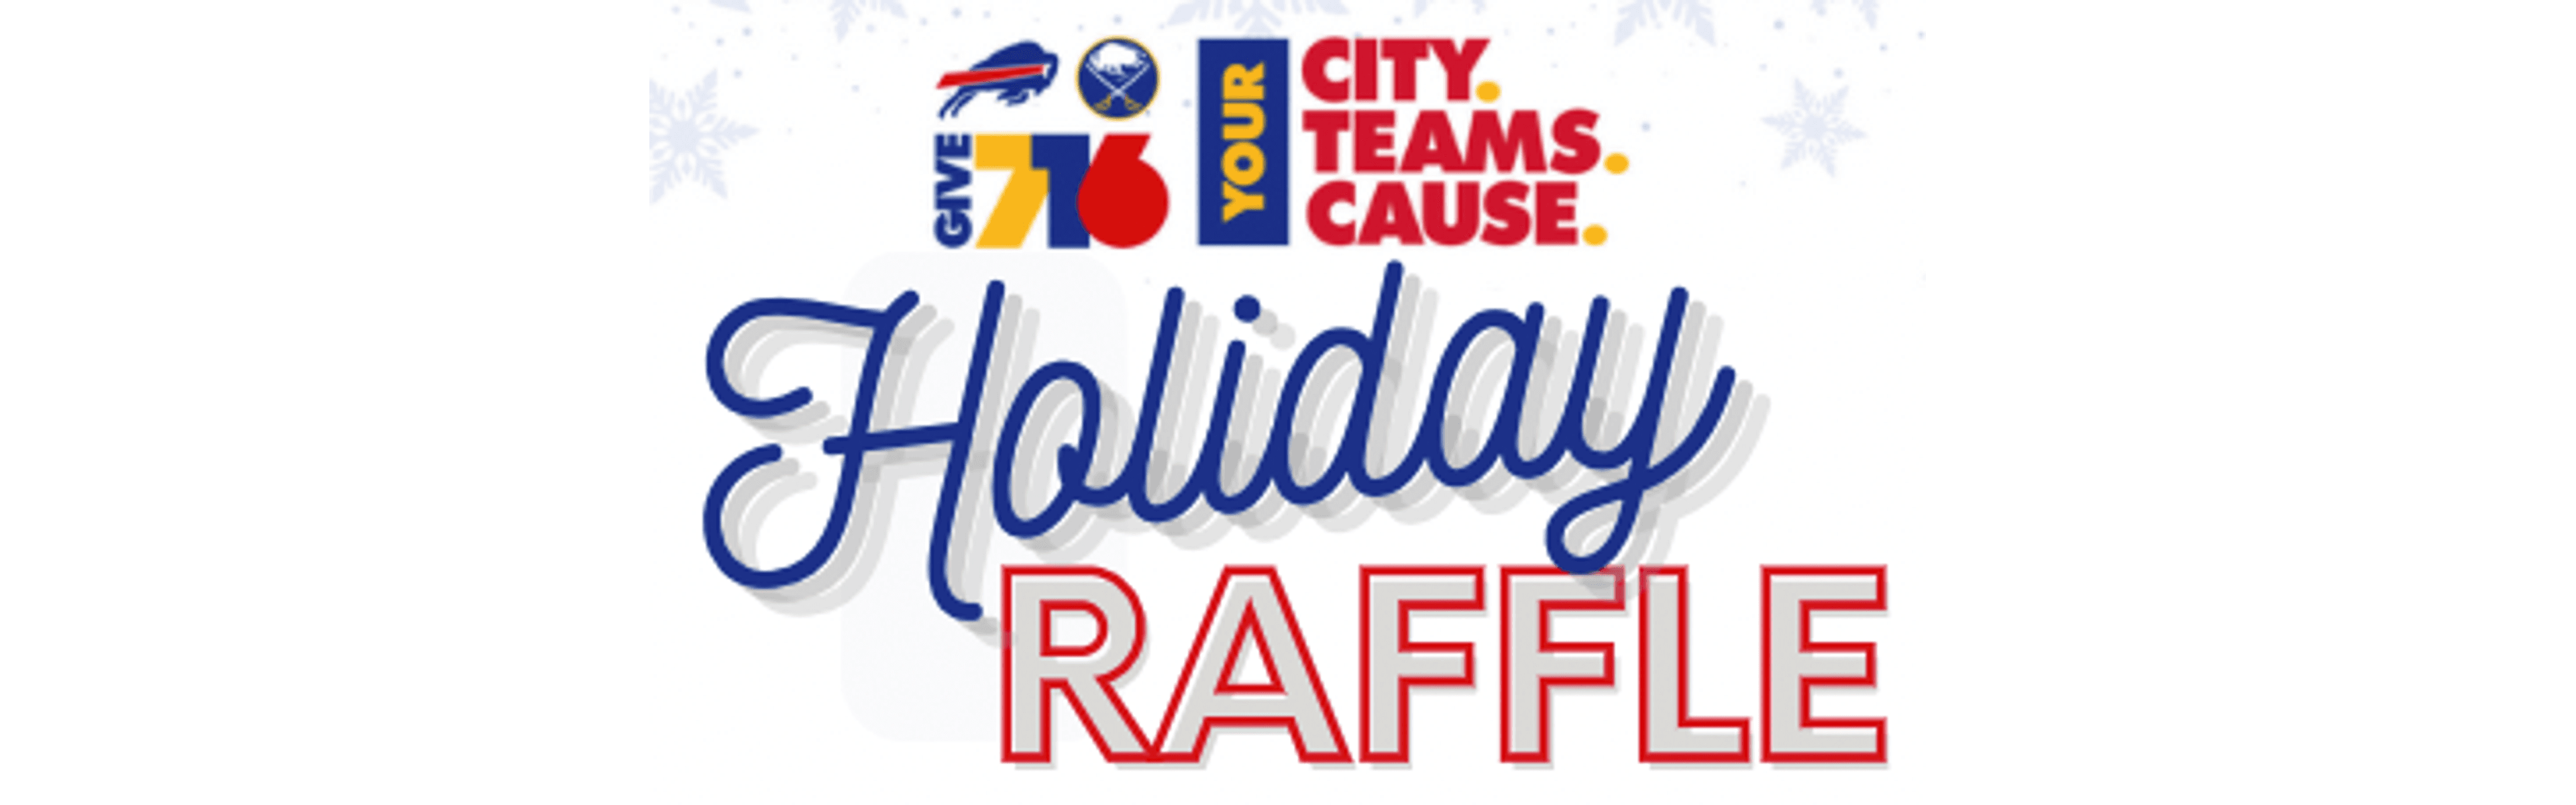 Give 716 Holiday 50/50 Raffle (2022-12-29 Red Wings) logo image